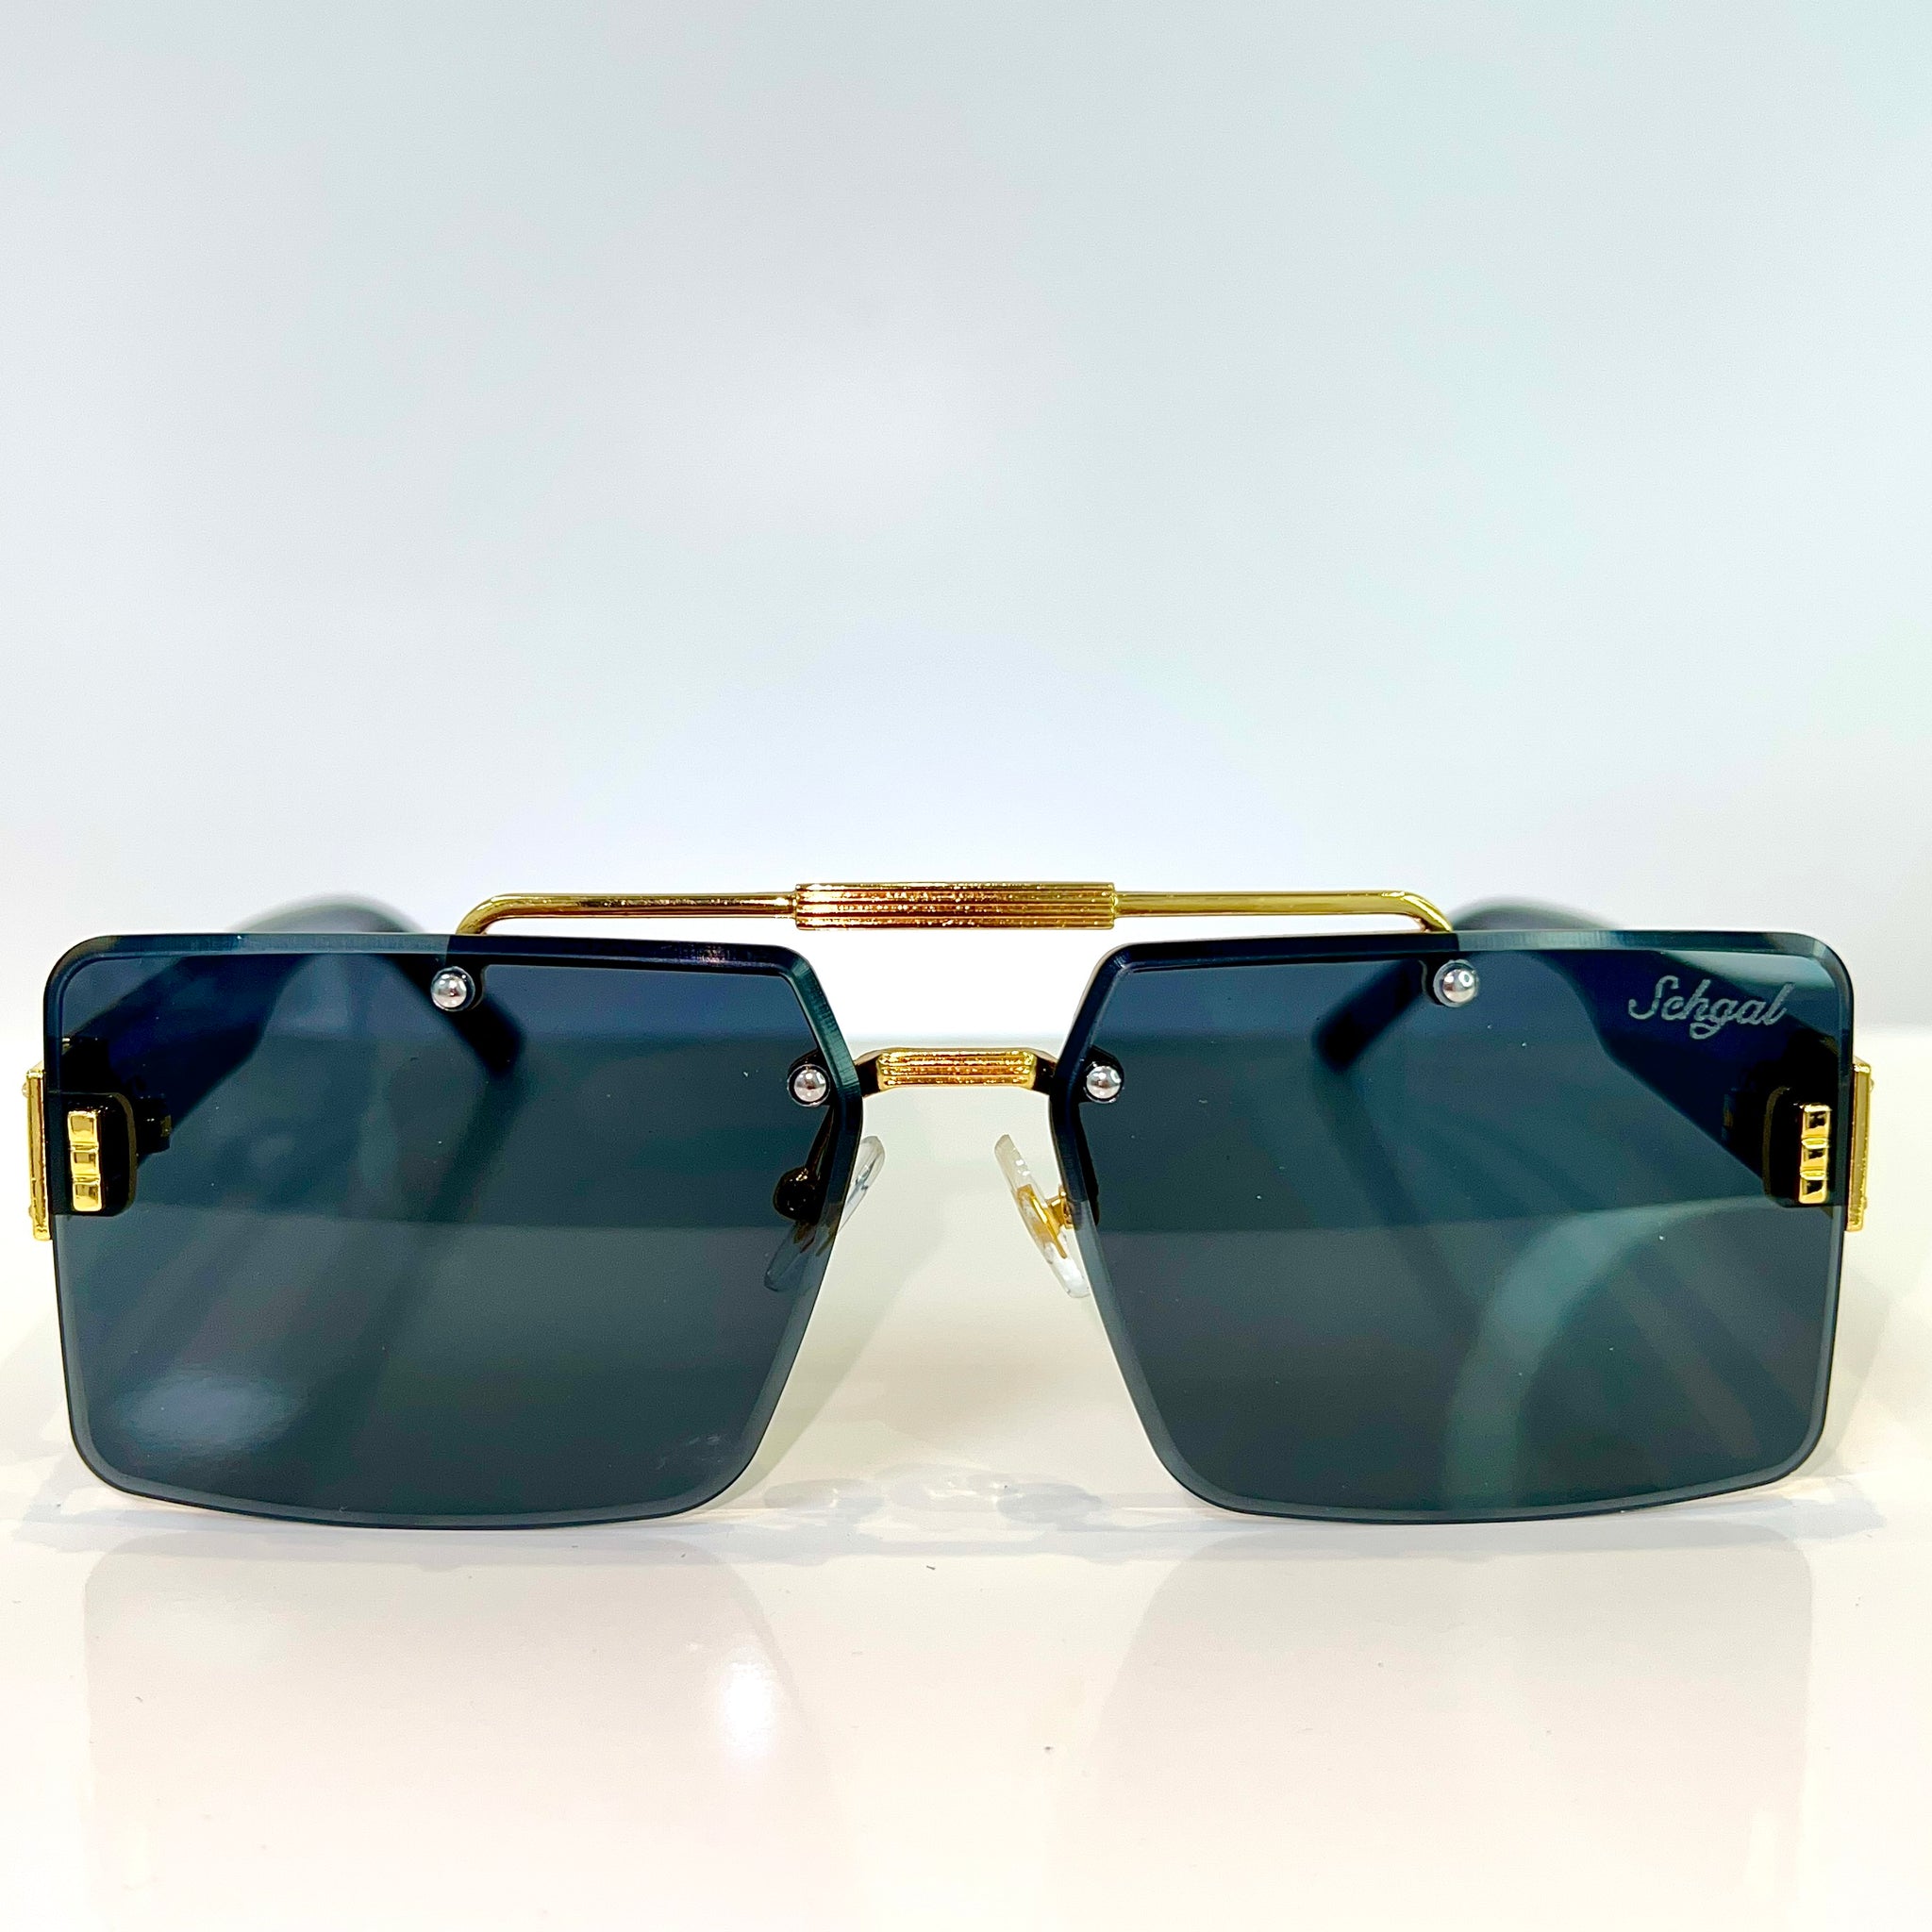 Project X Glasses - 14 carat gold plated - Black Shade